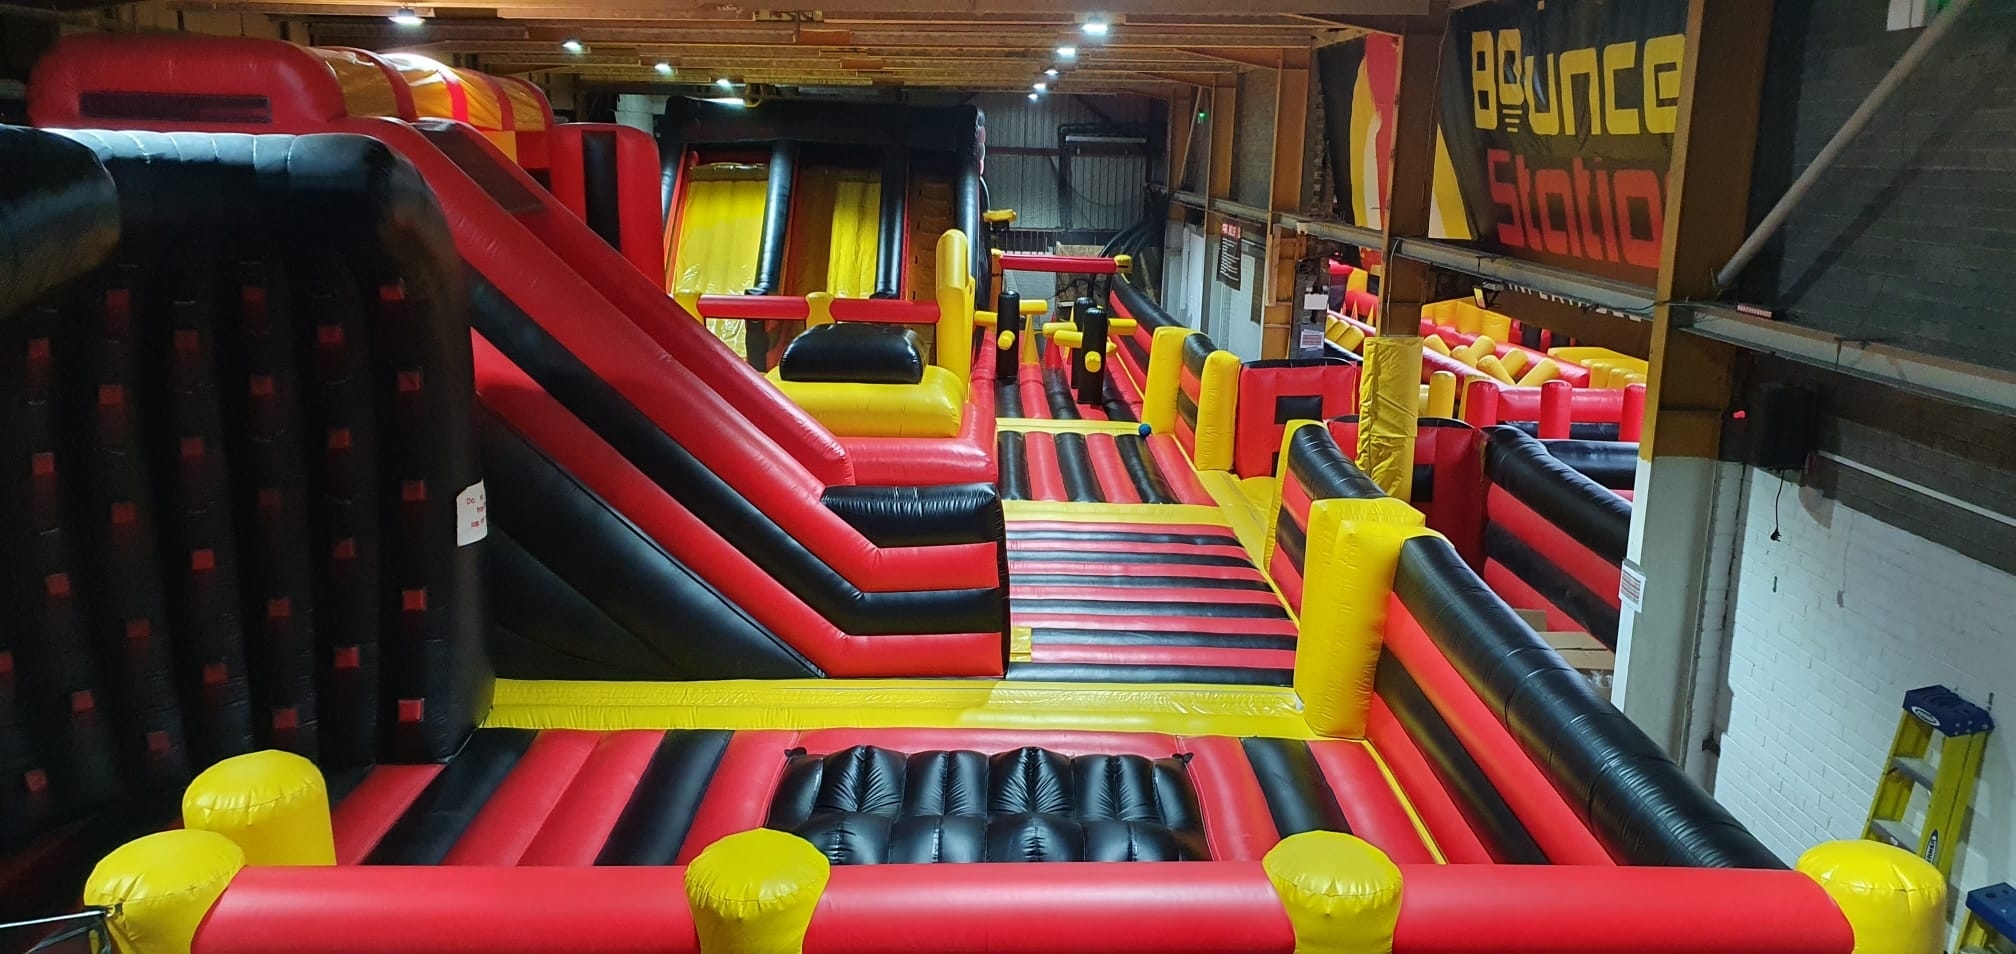 Bouncestation is typically used as a large inflatable park.